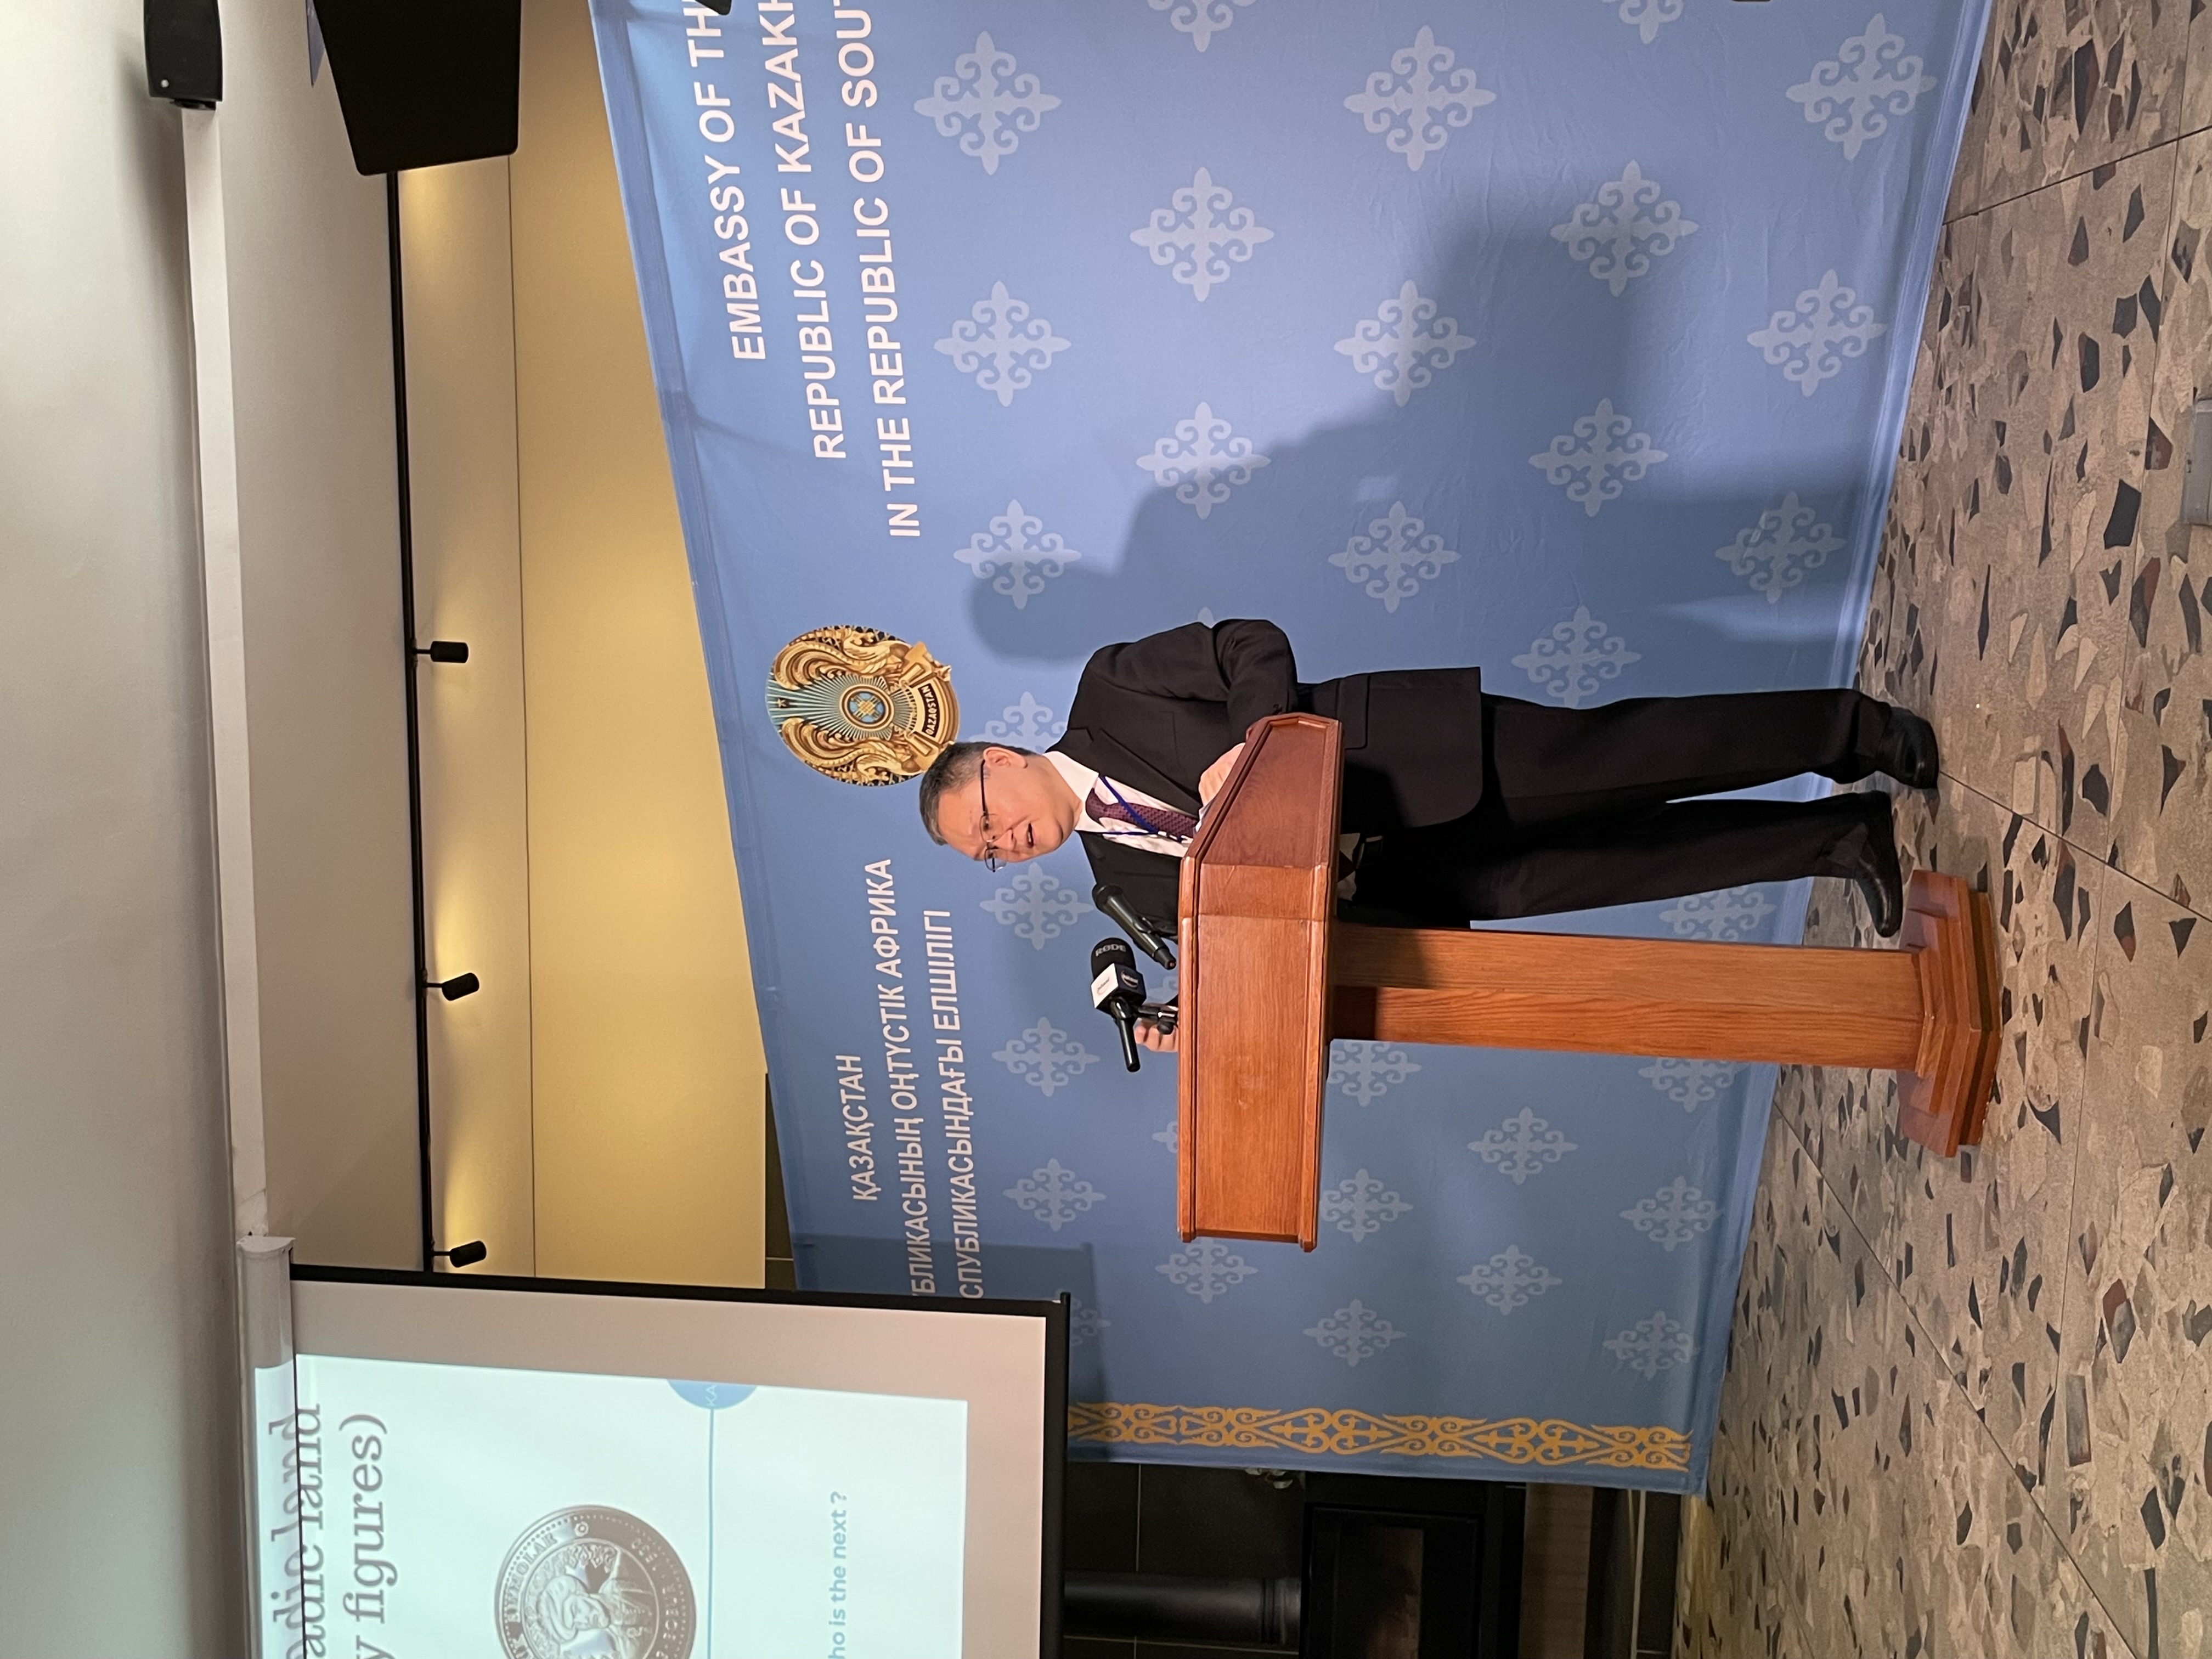 A Business Seminar on Kazakhstan’s Investment Opportunities was held in Johannesburg